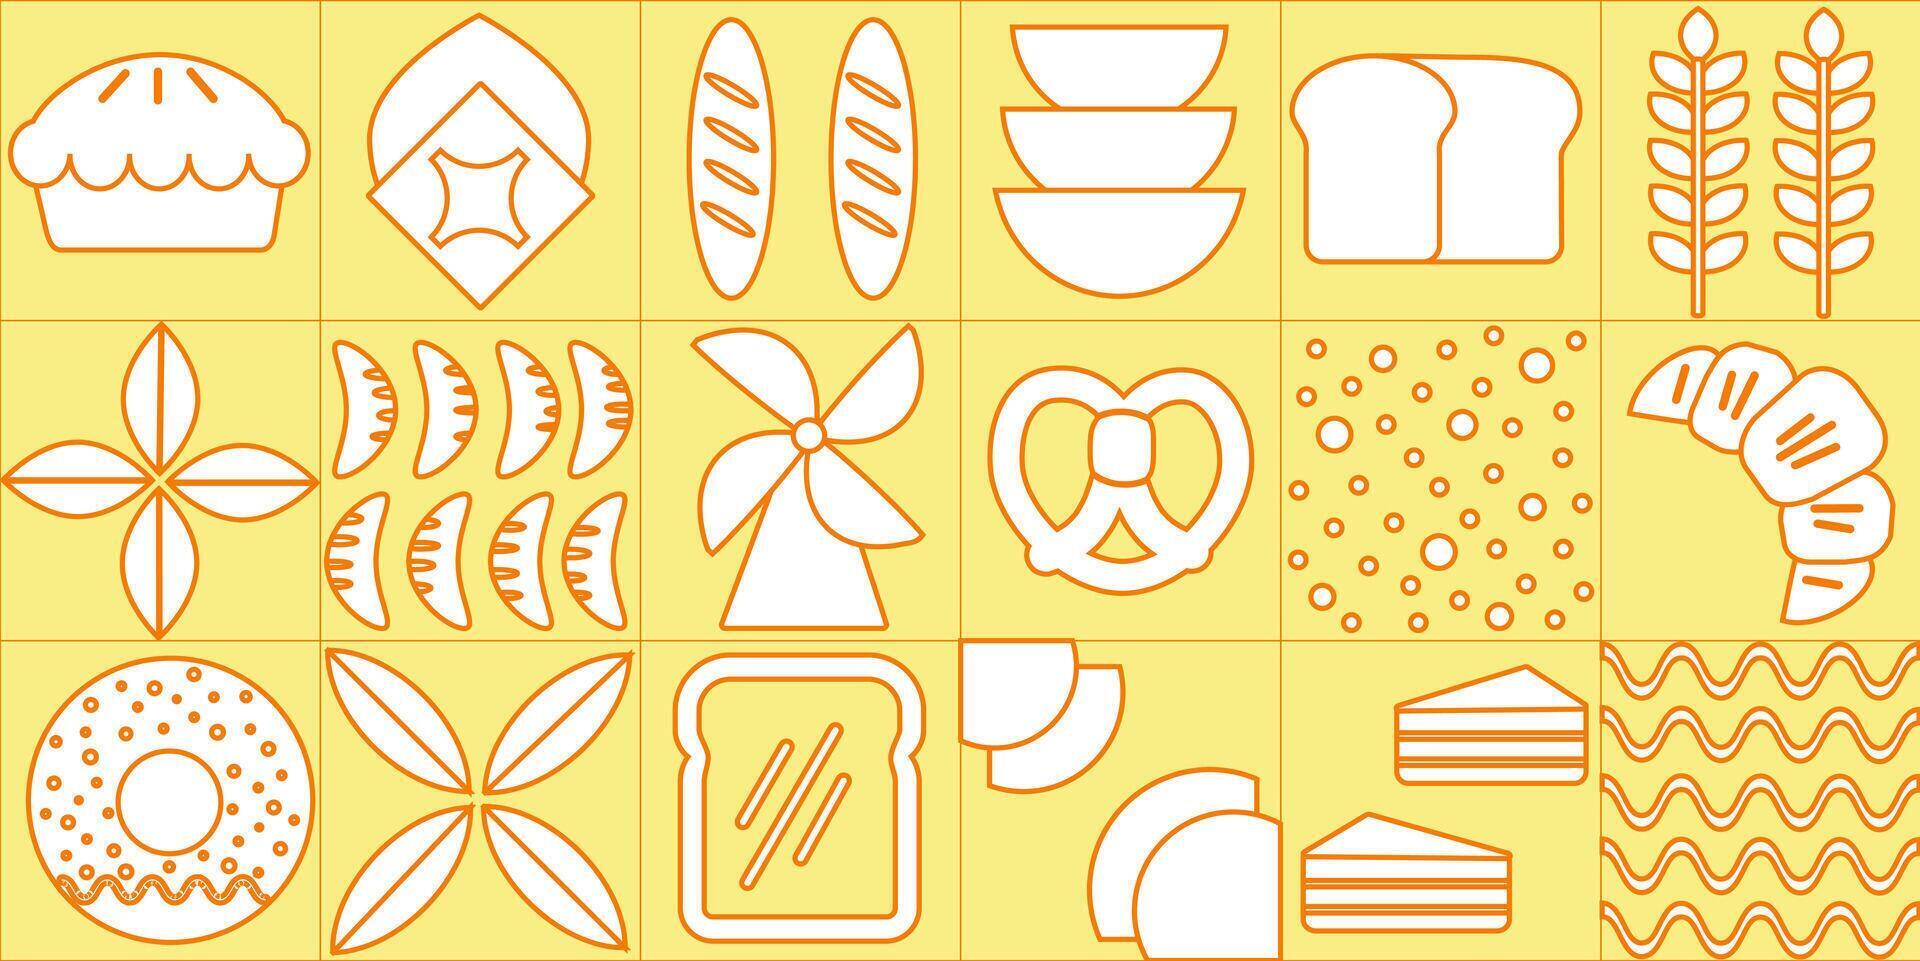 Baking and dessert in trendy geometric style - seamless pattern with icons related to bakery, cafe, cupcakes and logo design templates vector